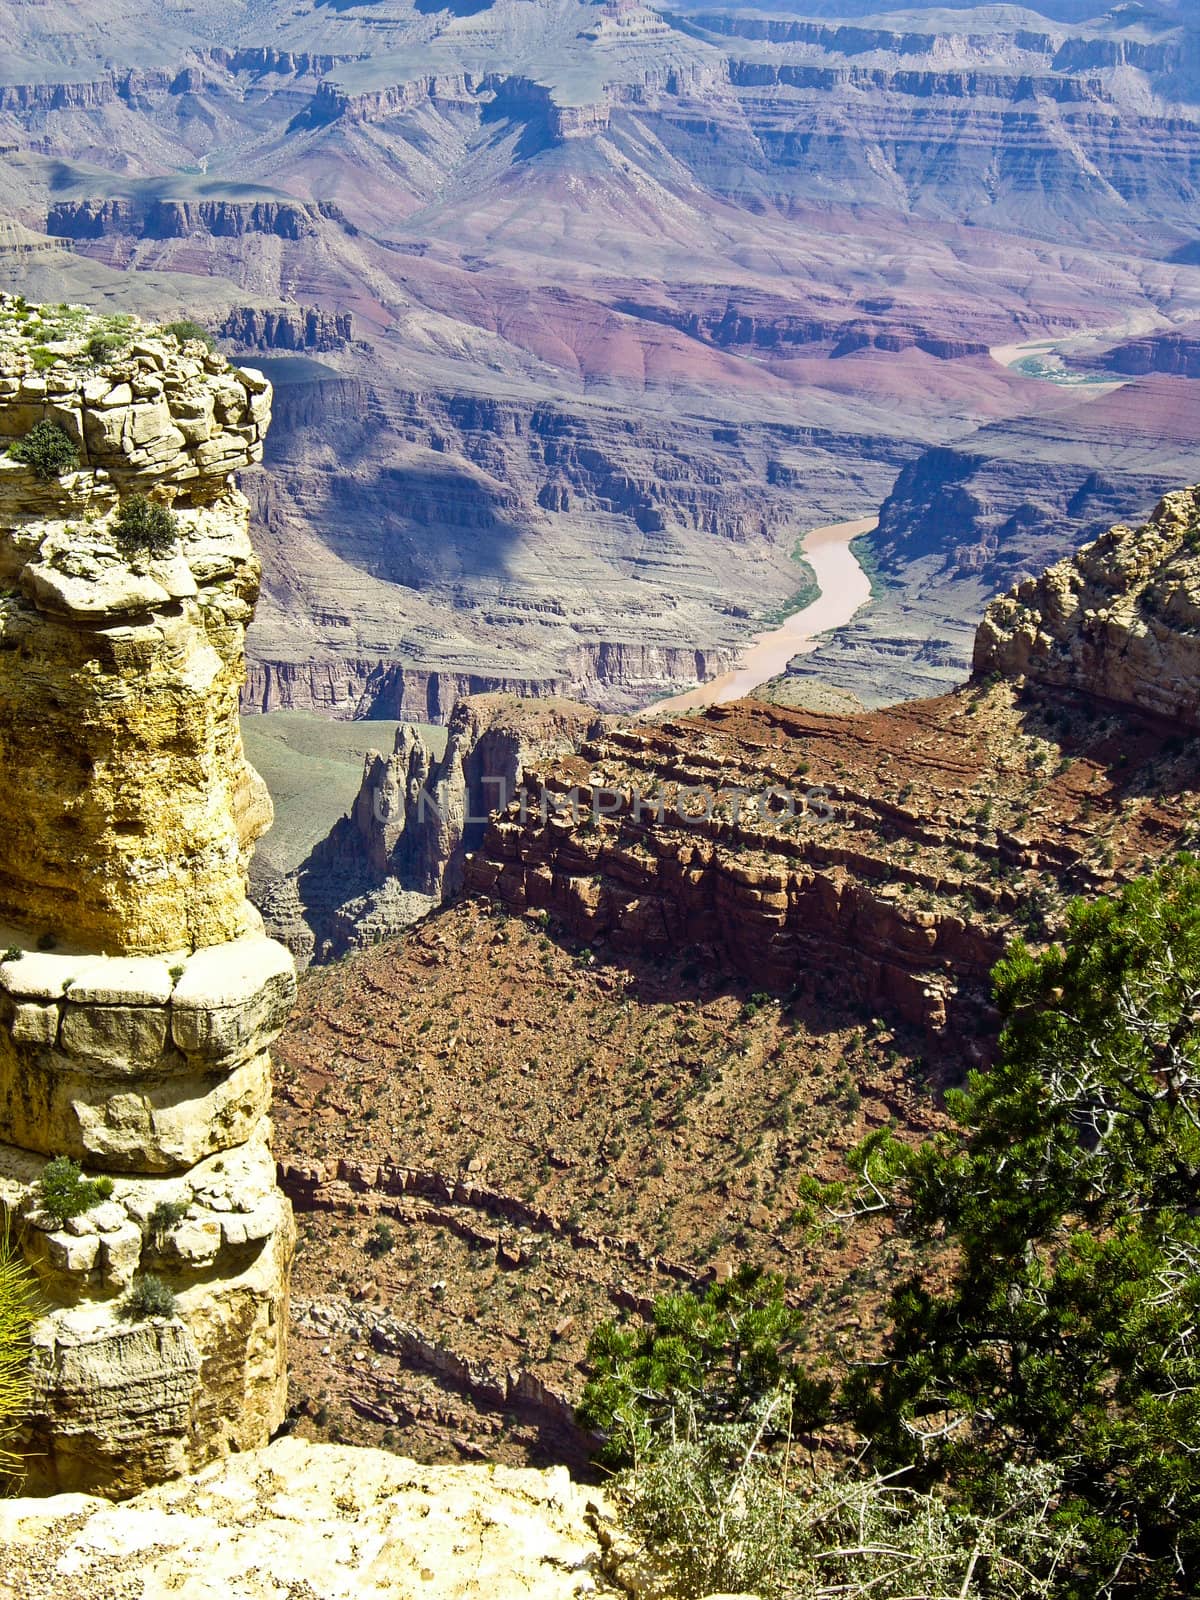 View of Colorado River on floor of Grand Canyon Arizona